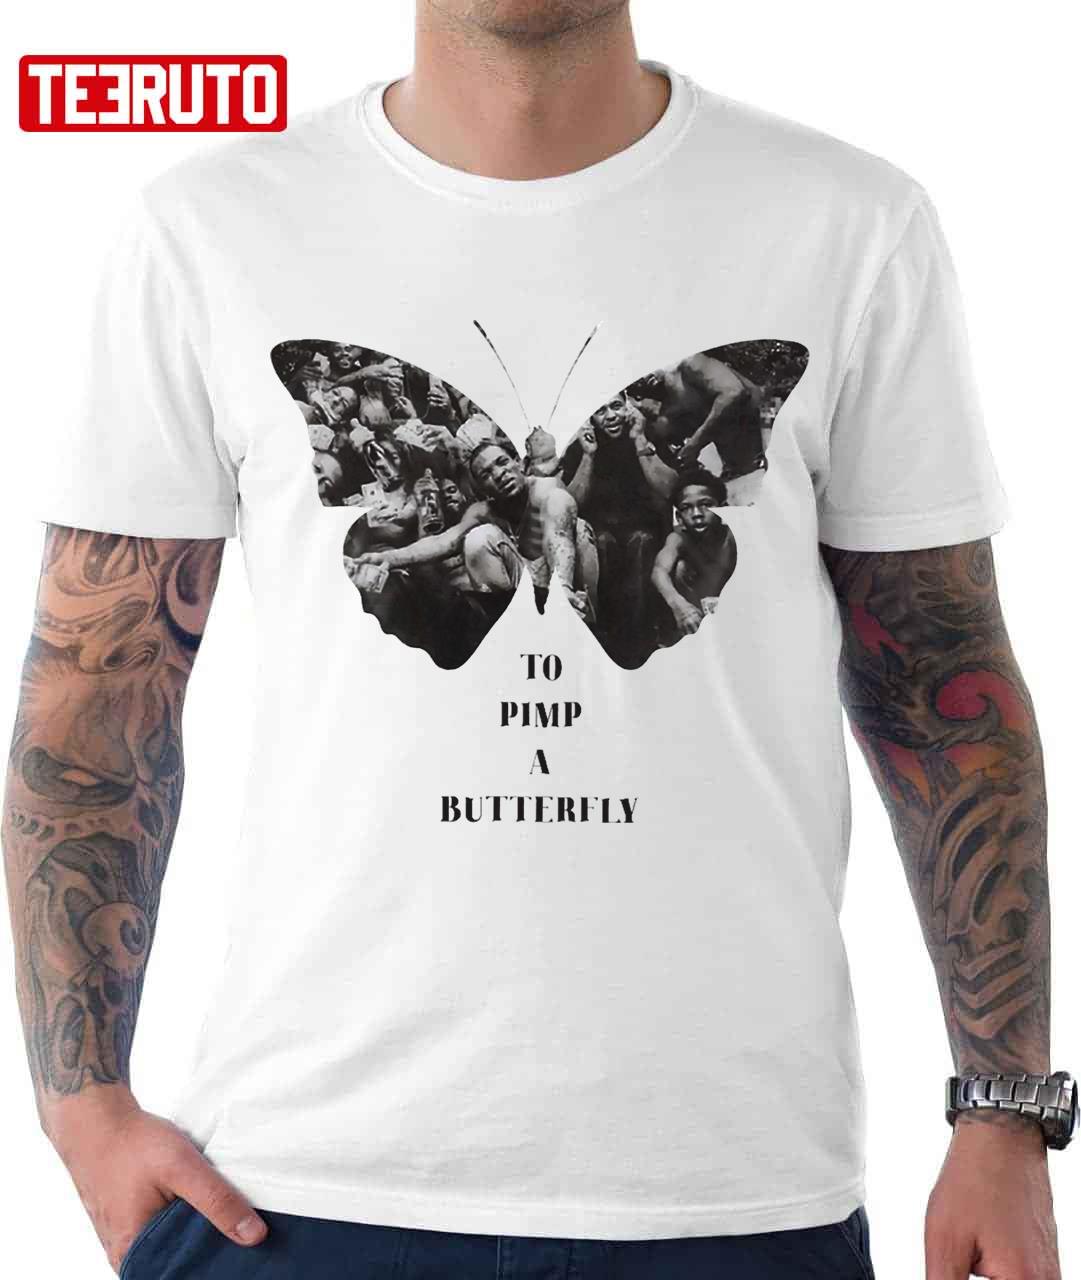 Vintage Of To Pimp A Butterfly Kendrick Lamar Unisex T-Shirt - Teeruto